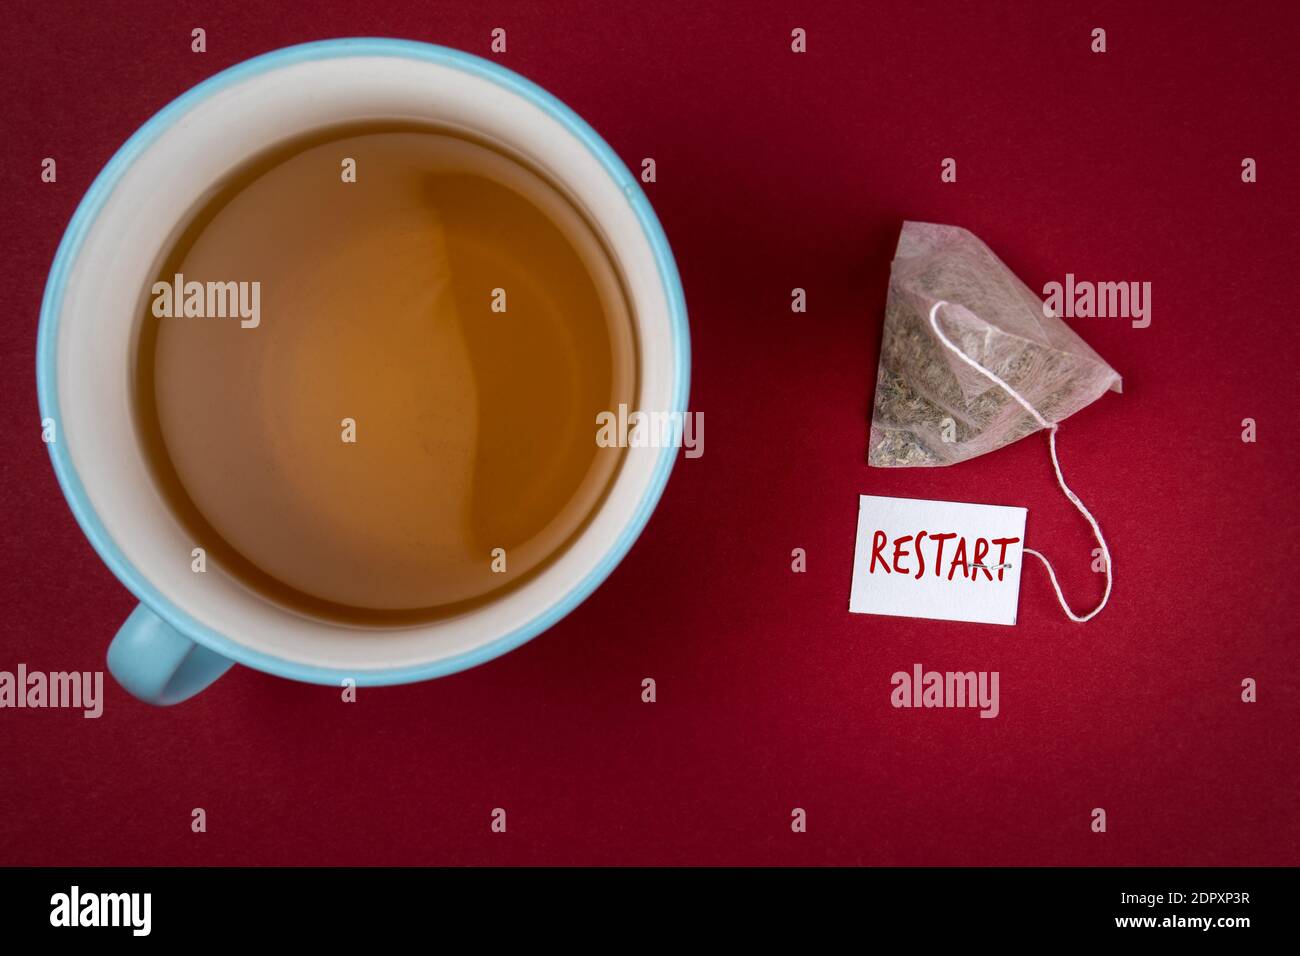 RESTART. Business concept. Tea bag and mug on a red background. Stock Photo